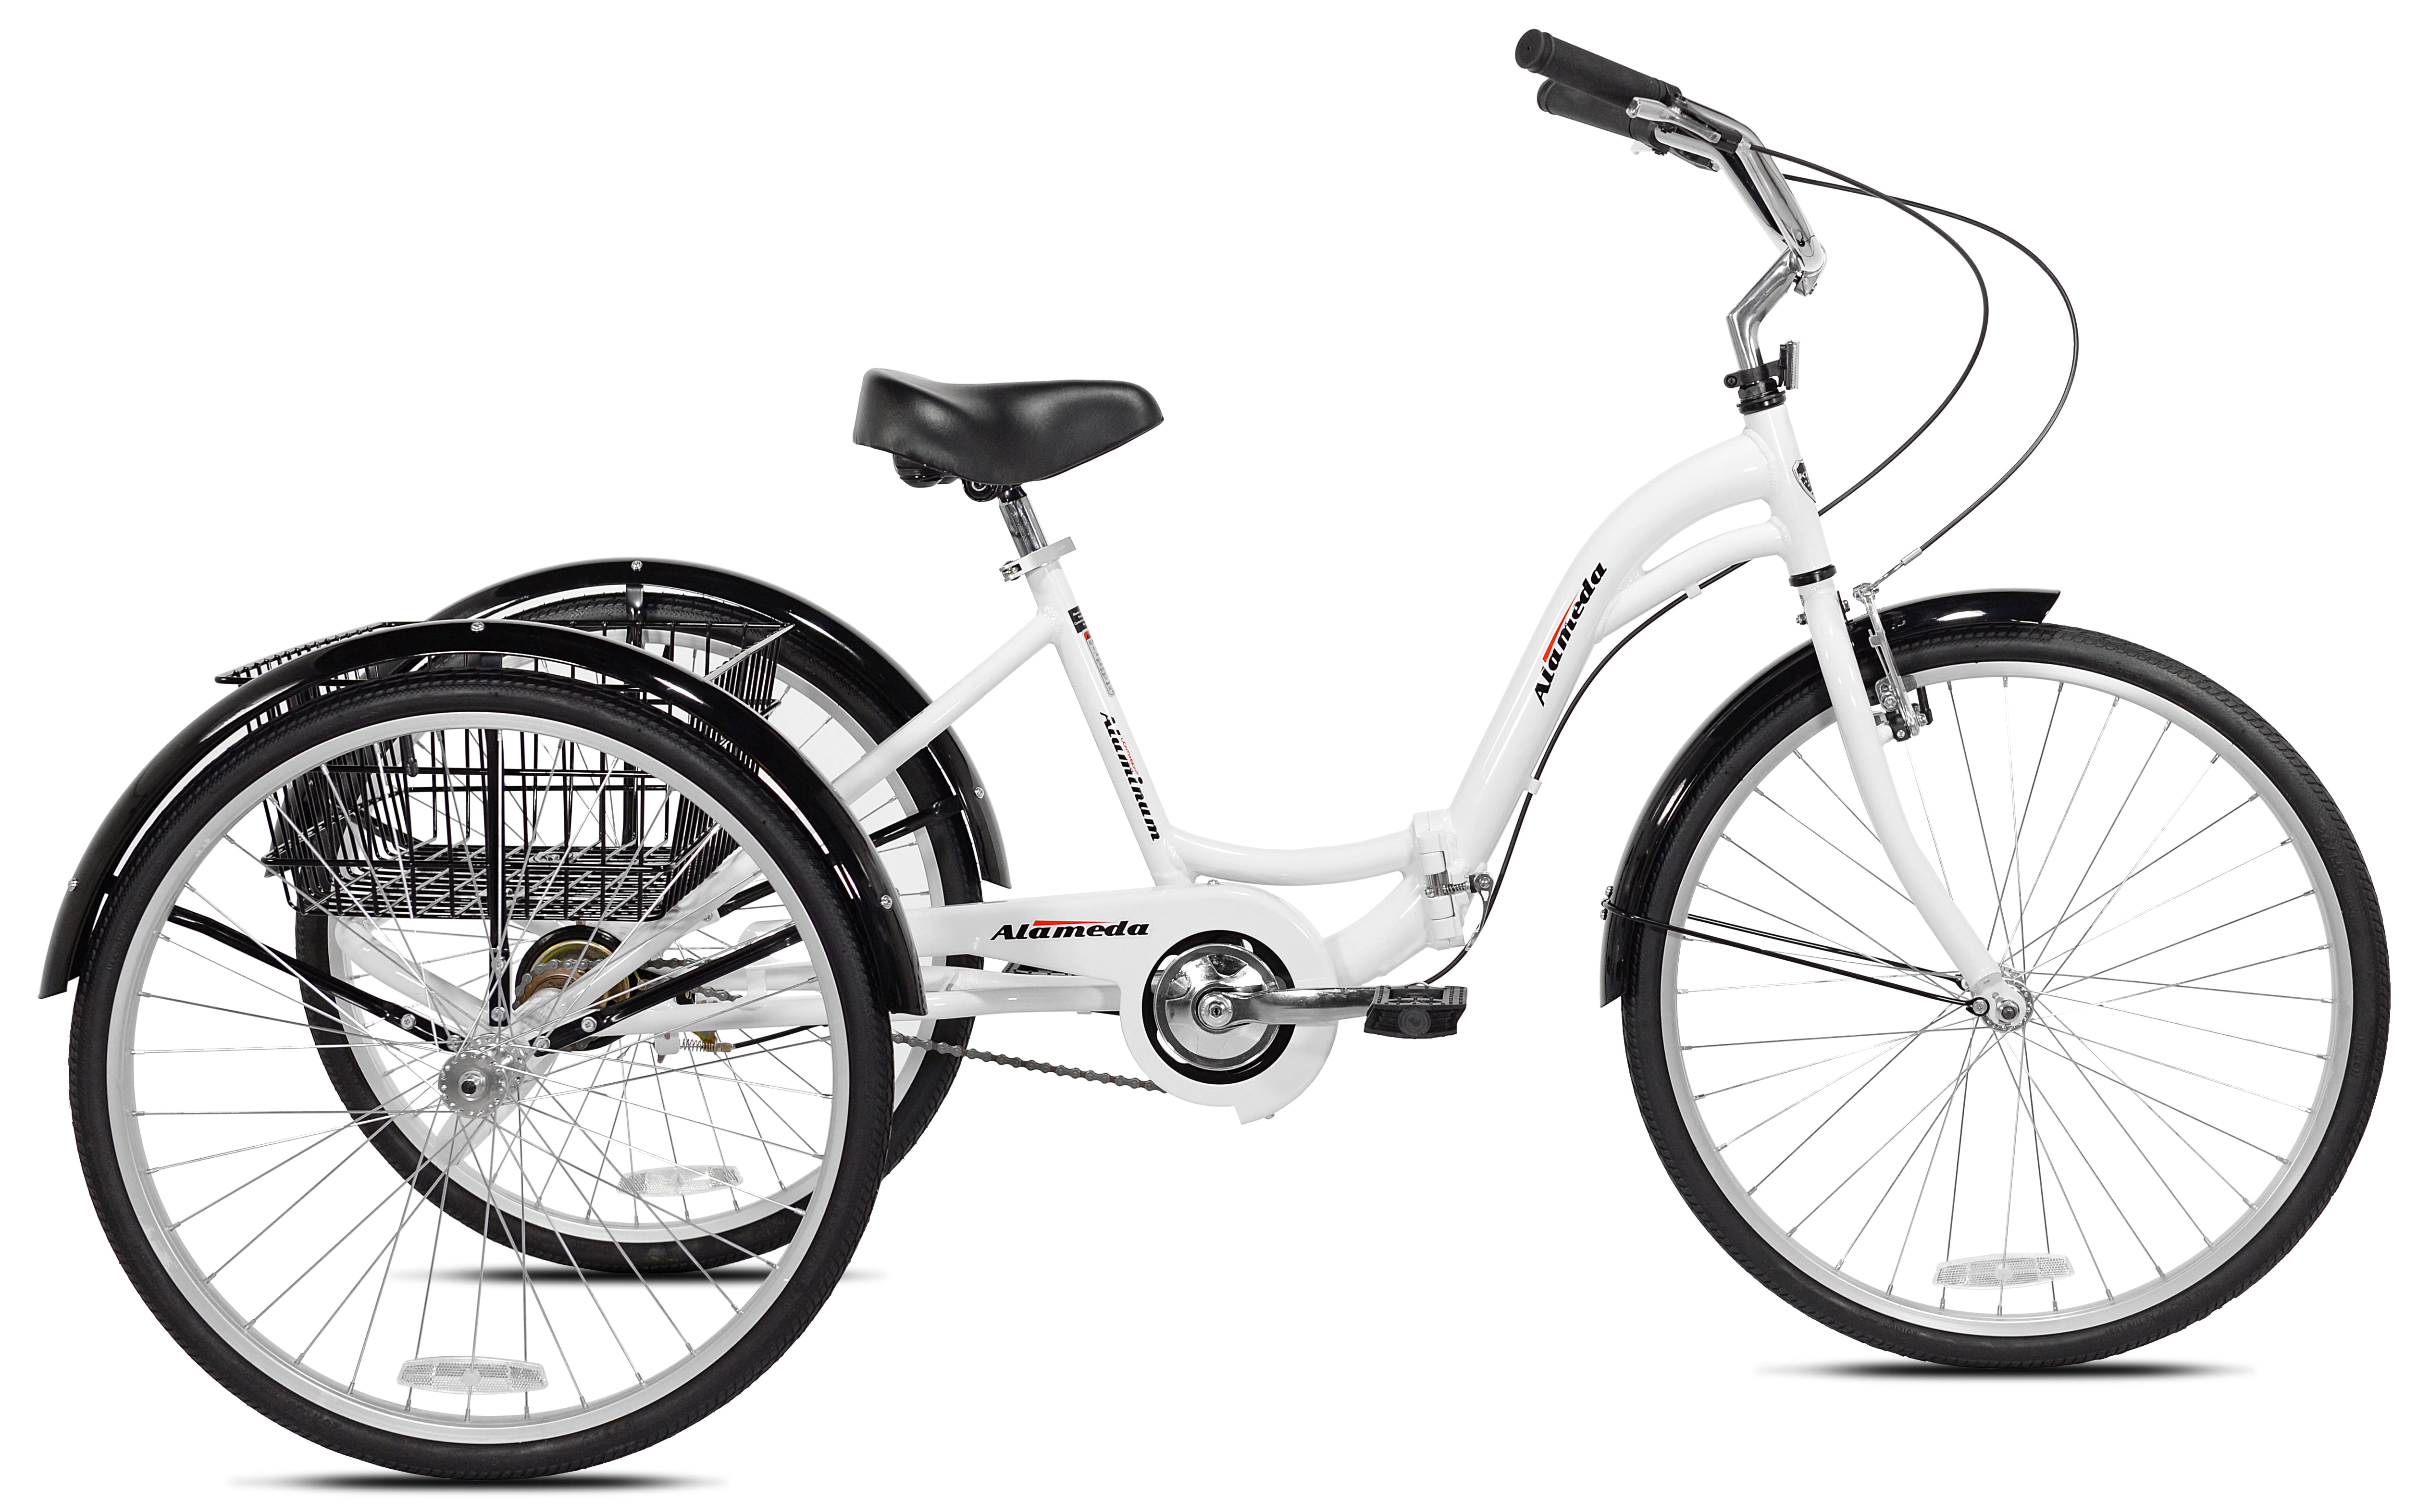 Bkisy Tricycle Adult 24’’ Wheels Adult Tricycle 1-Speed 3 Wheel Bikes White for Adults Three Wheel Bike for Adults Adult Trike Adult Folding Tricycle Foldable 3 Wheel Bike for Adults